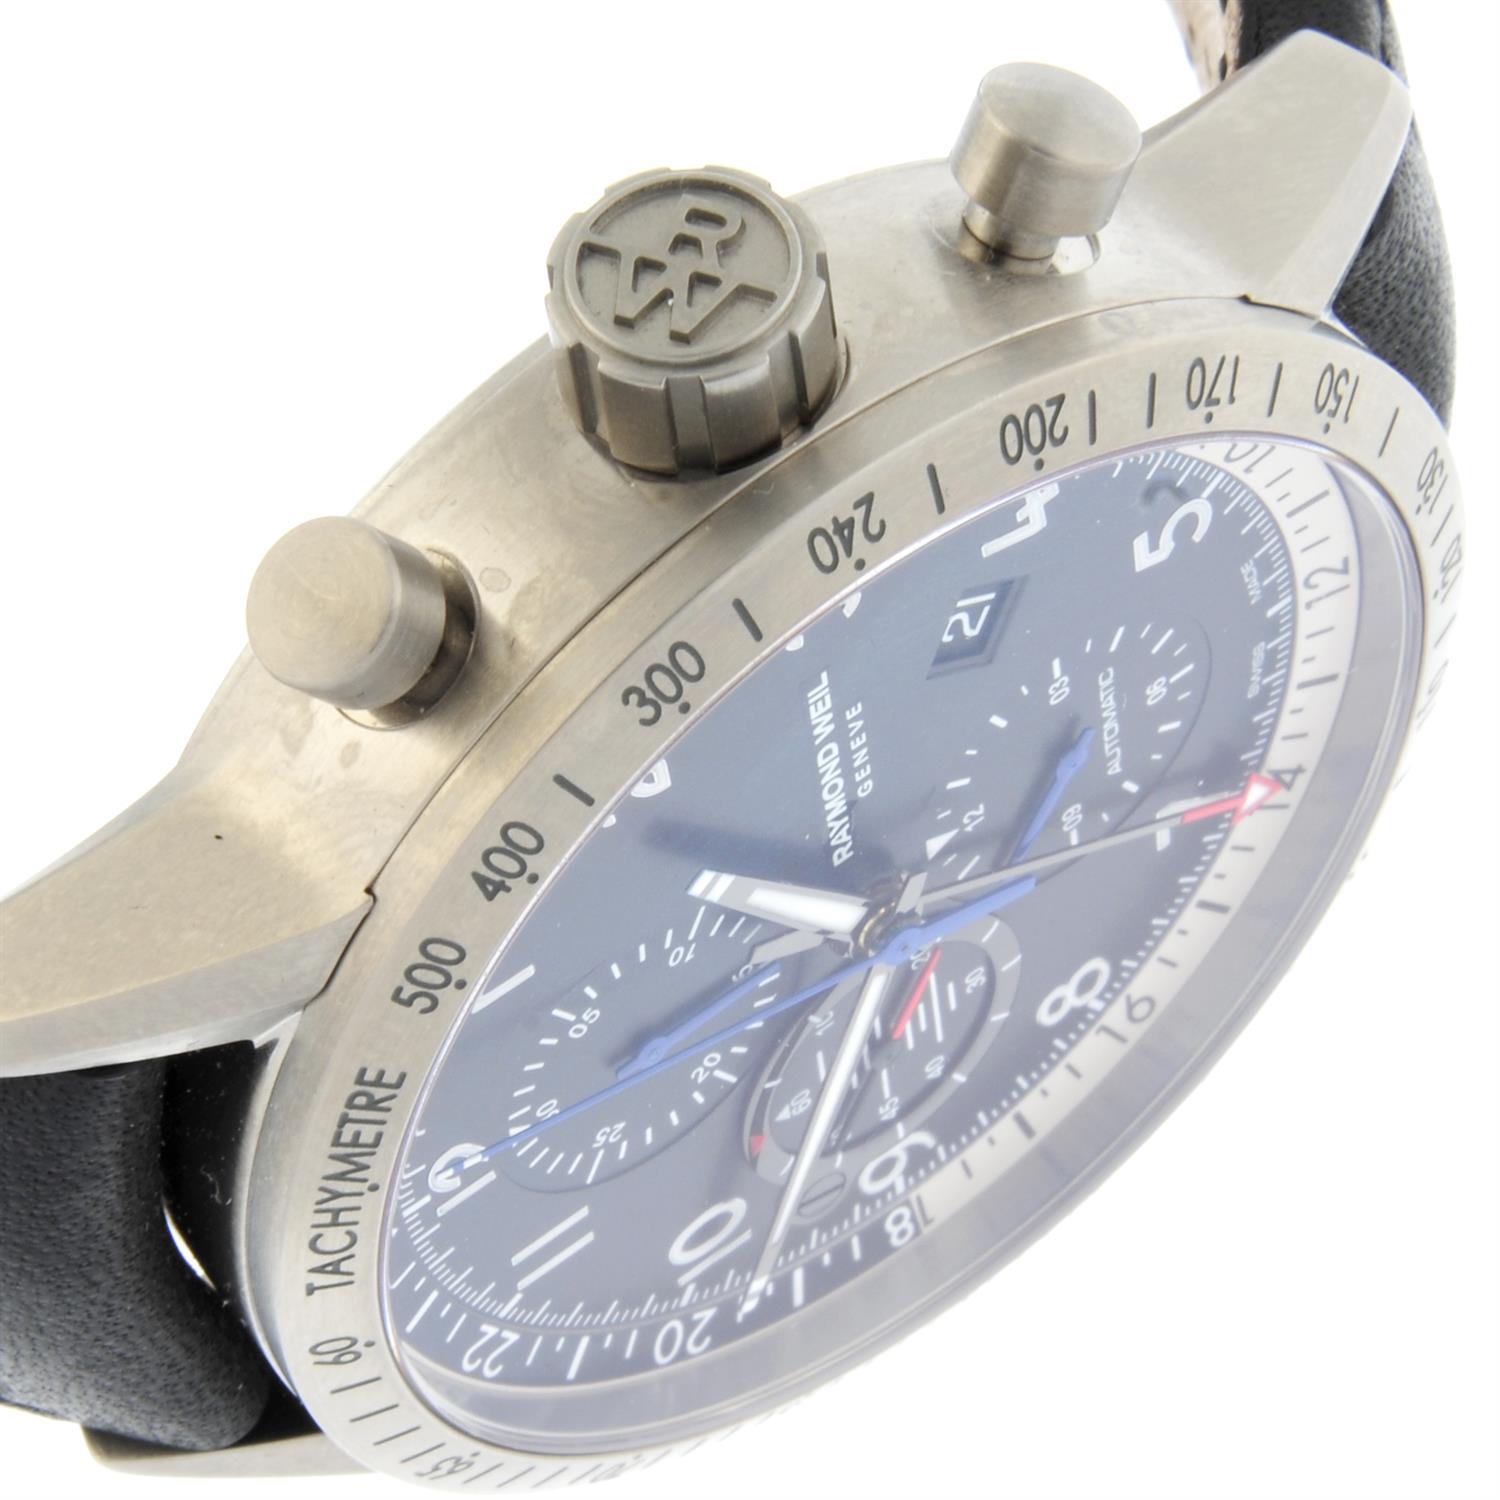 Raymond Weil - a Freelancer Piper chronograph watch, 45mm. - Image 3 of 4